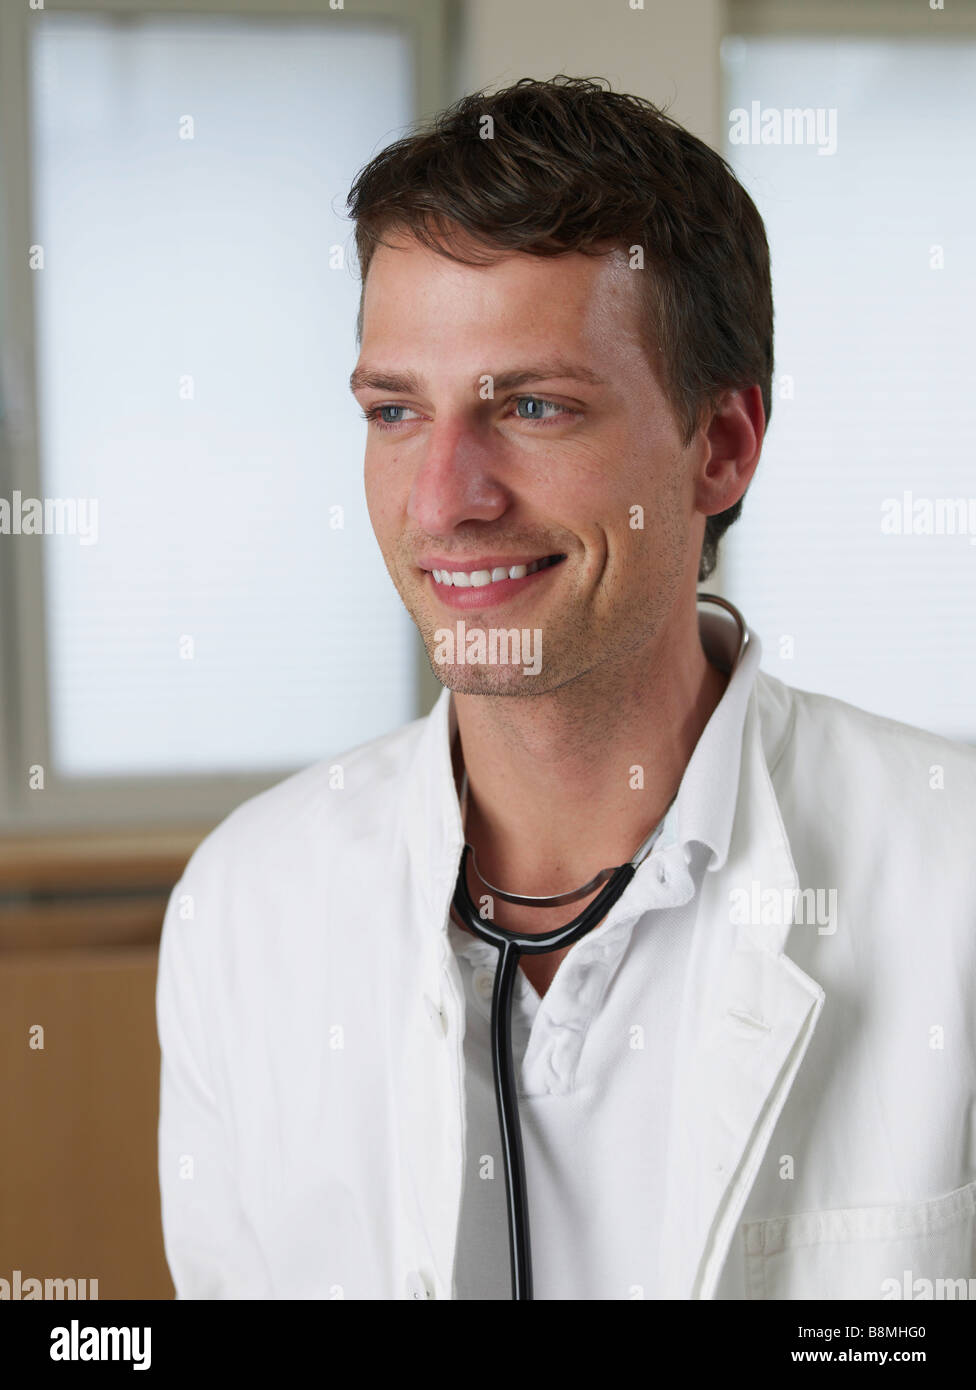 Young doctor Stock Photo